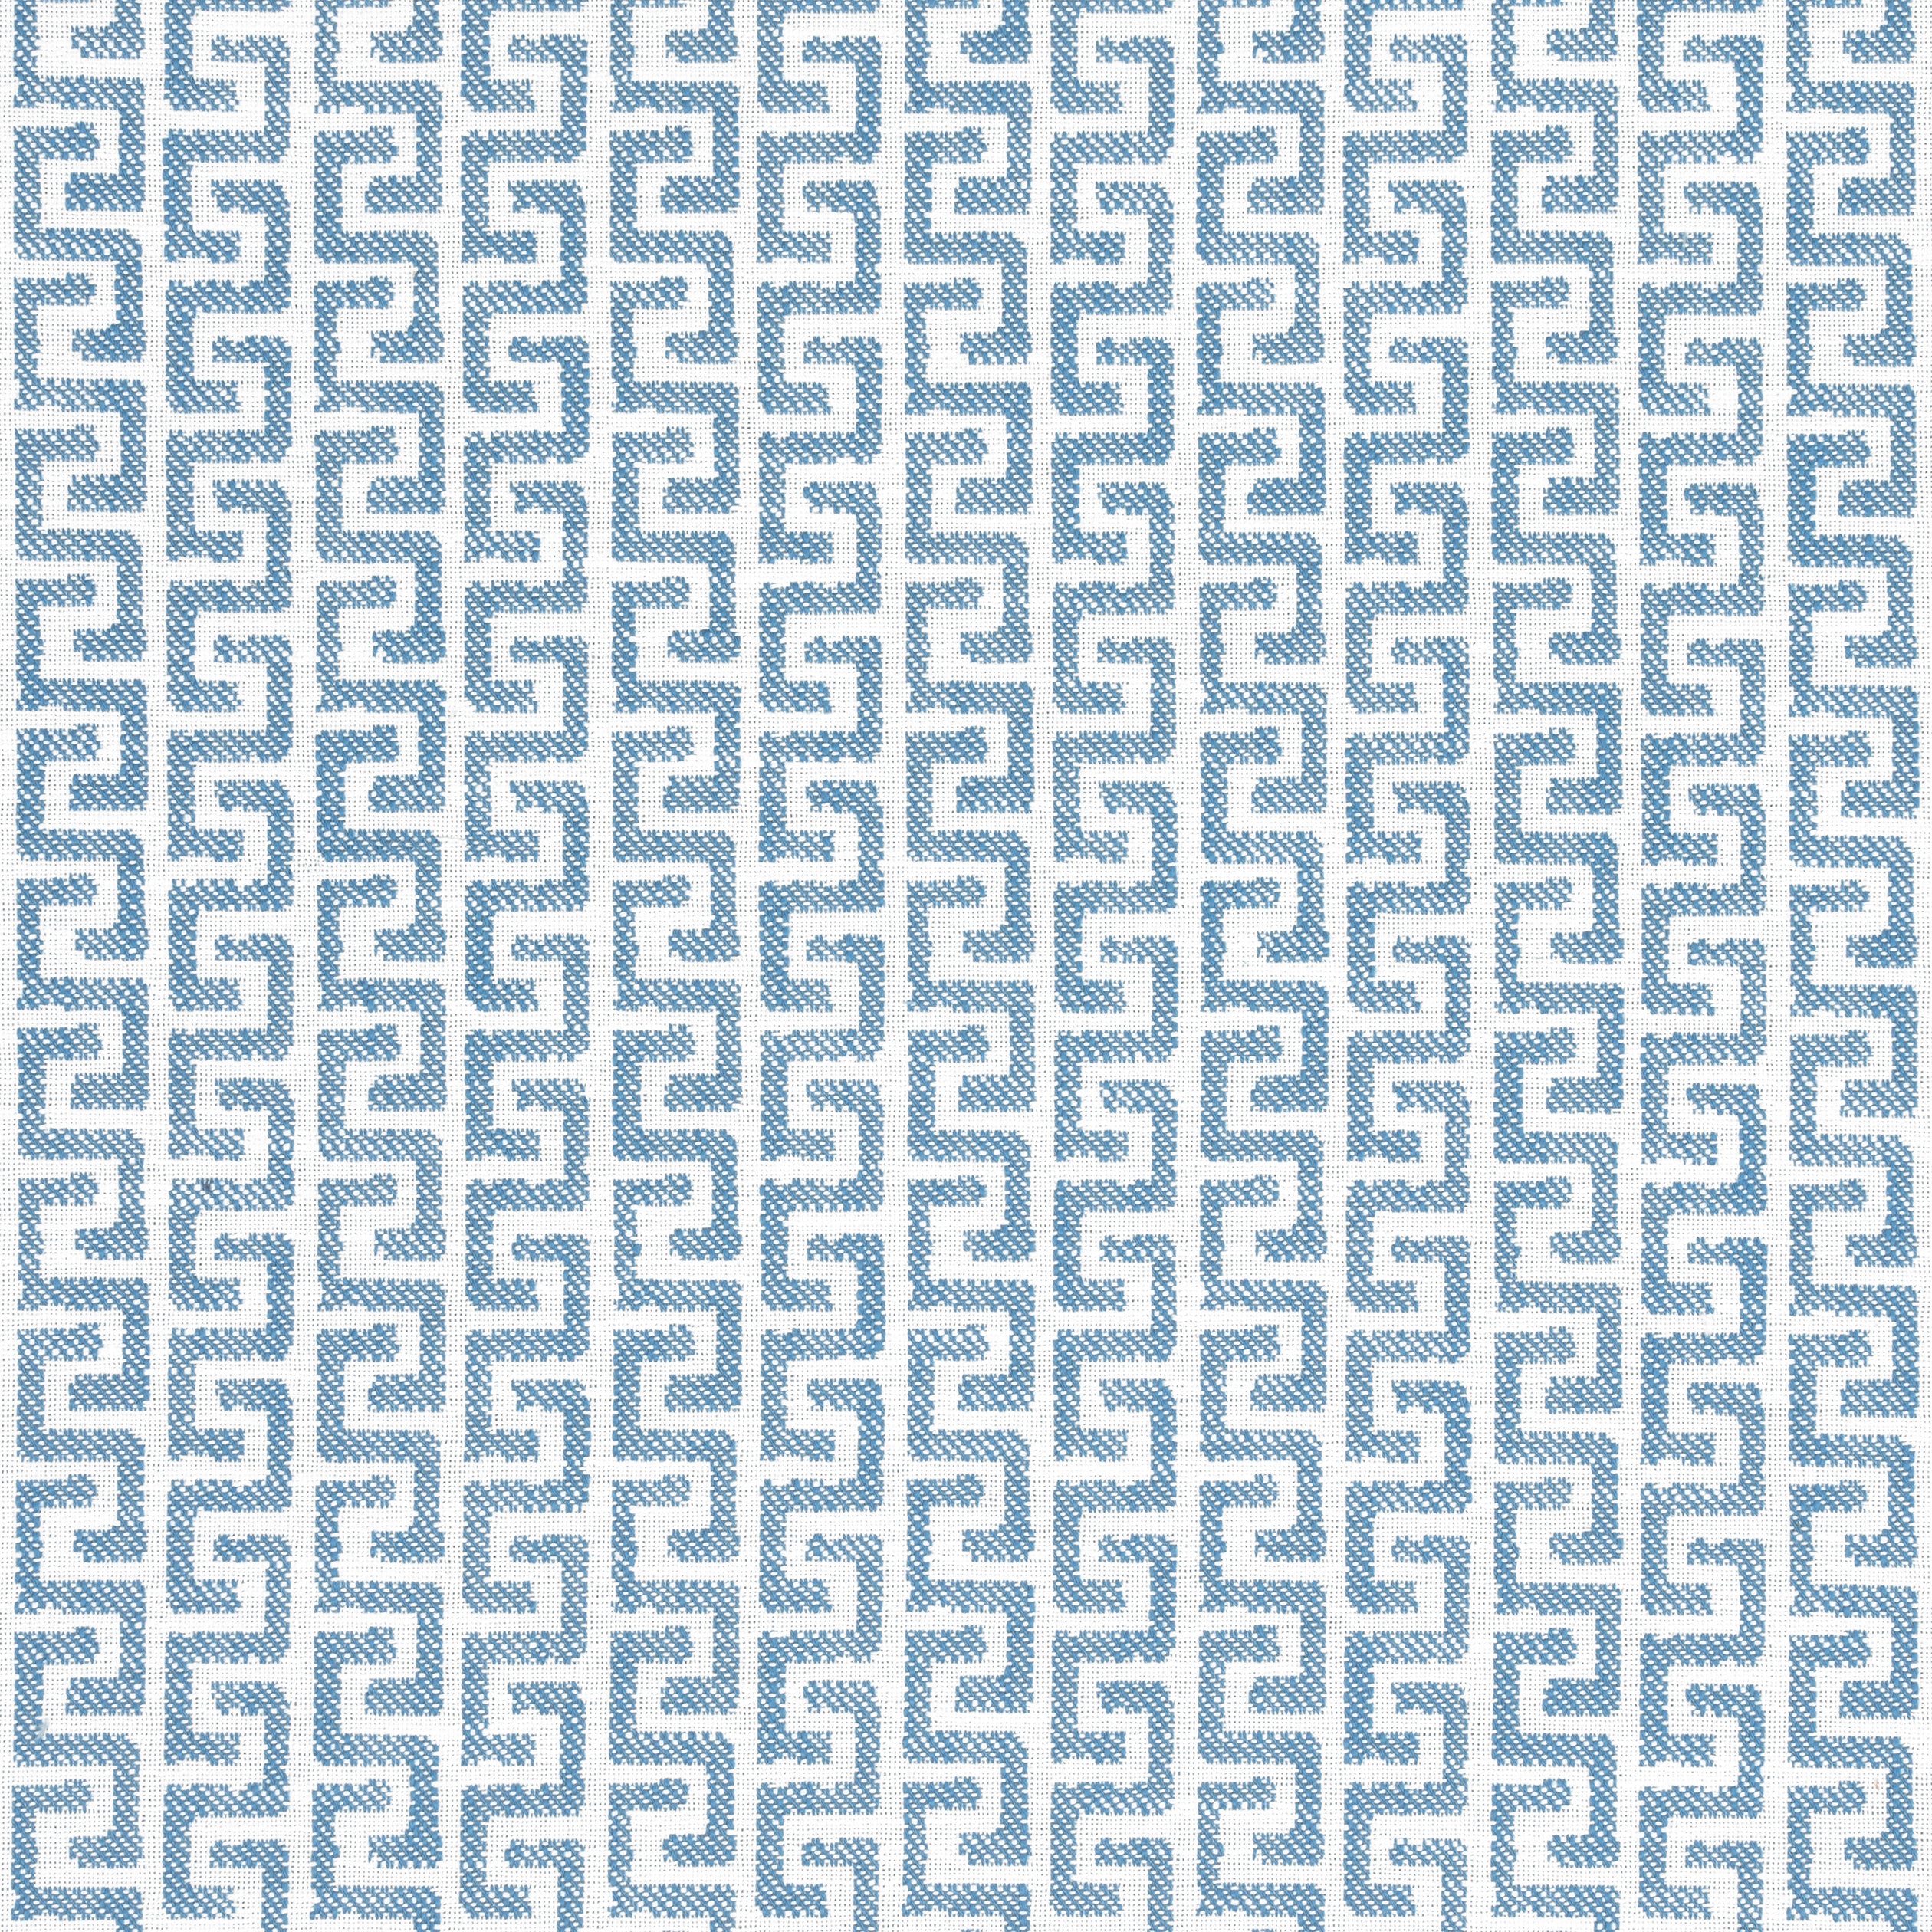 Merritt fabric in cornflower color - pattern number W74248 - by Thibaut in the Passage collection